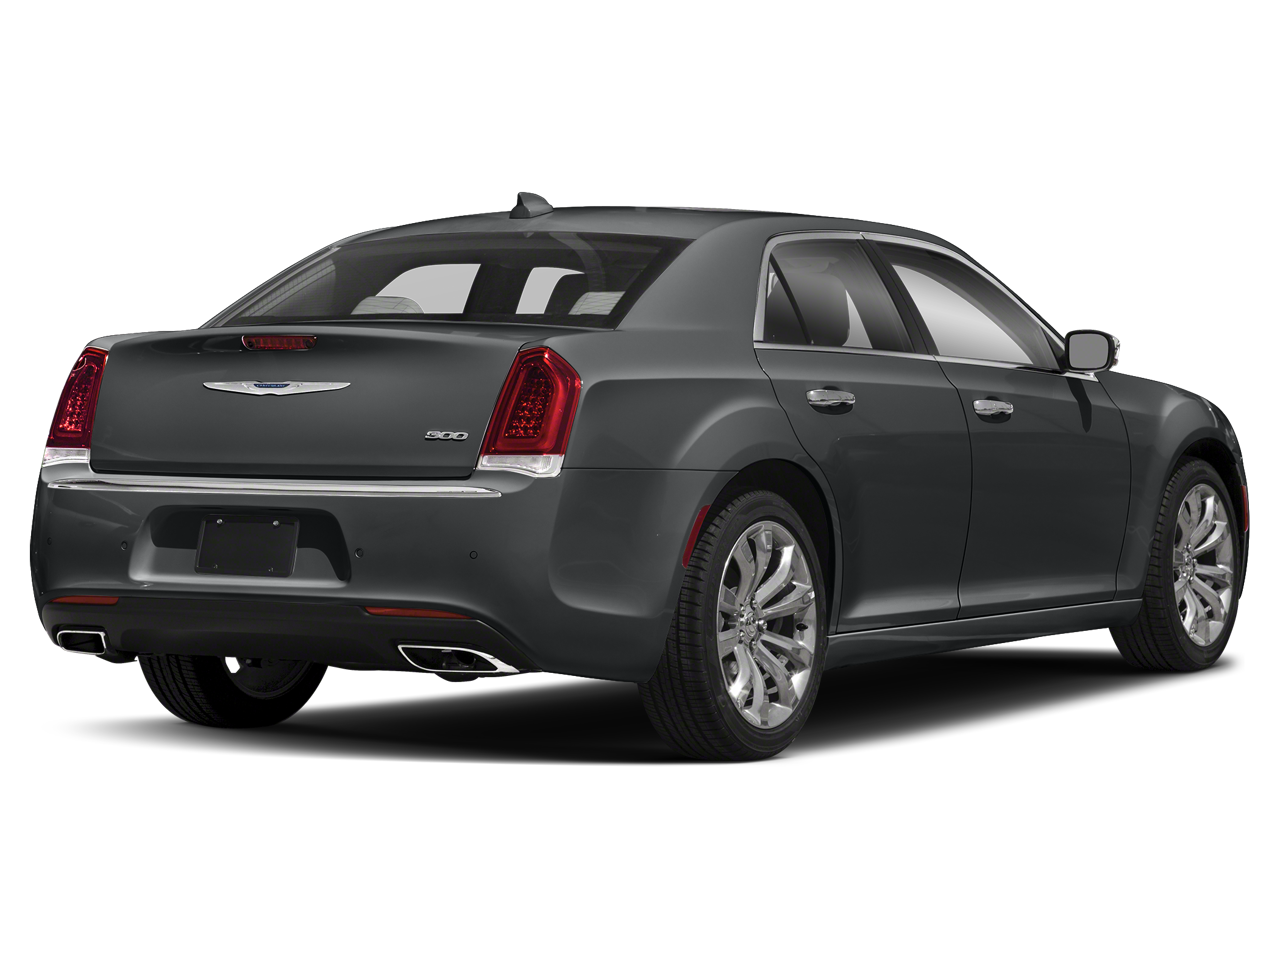 Used 2019 Chrysler 300 Limited with VIN 2C3CCAKG2KH687294 for sale in Minneapolis, Minnesota